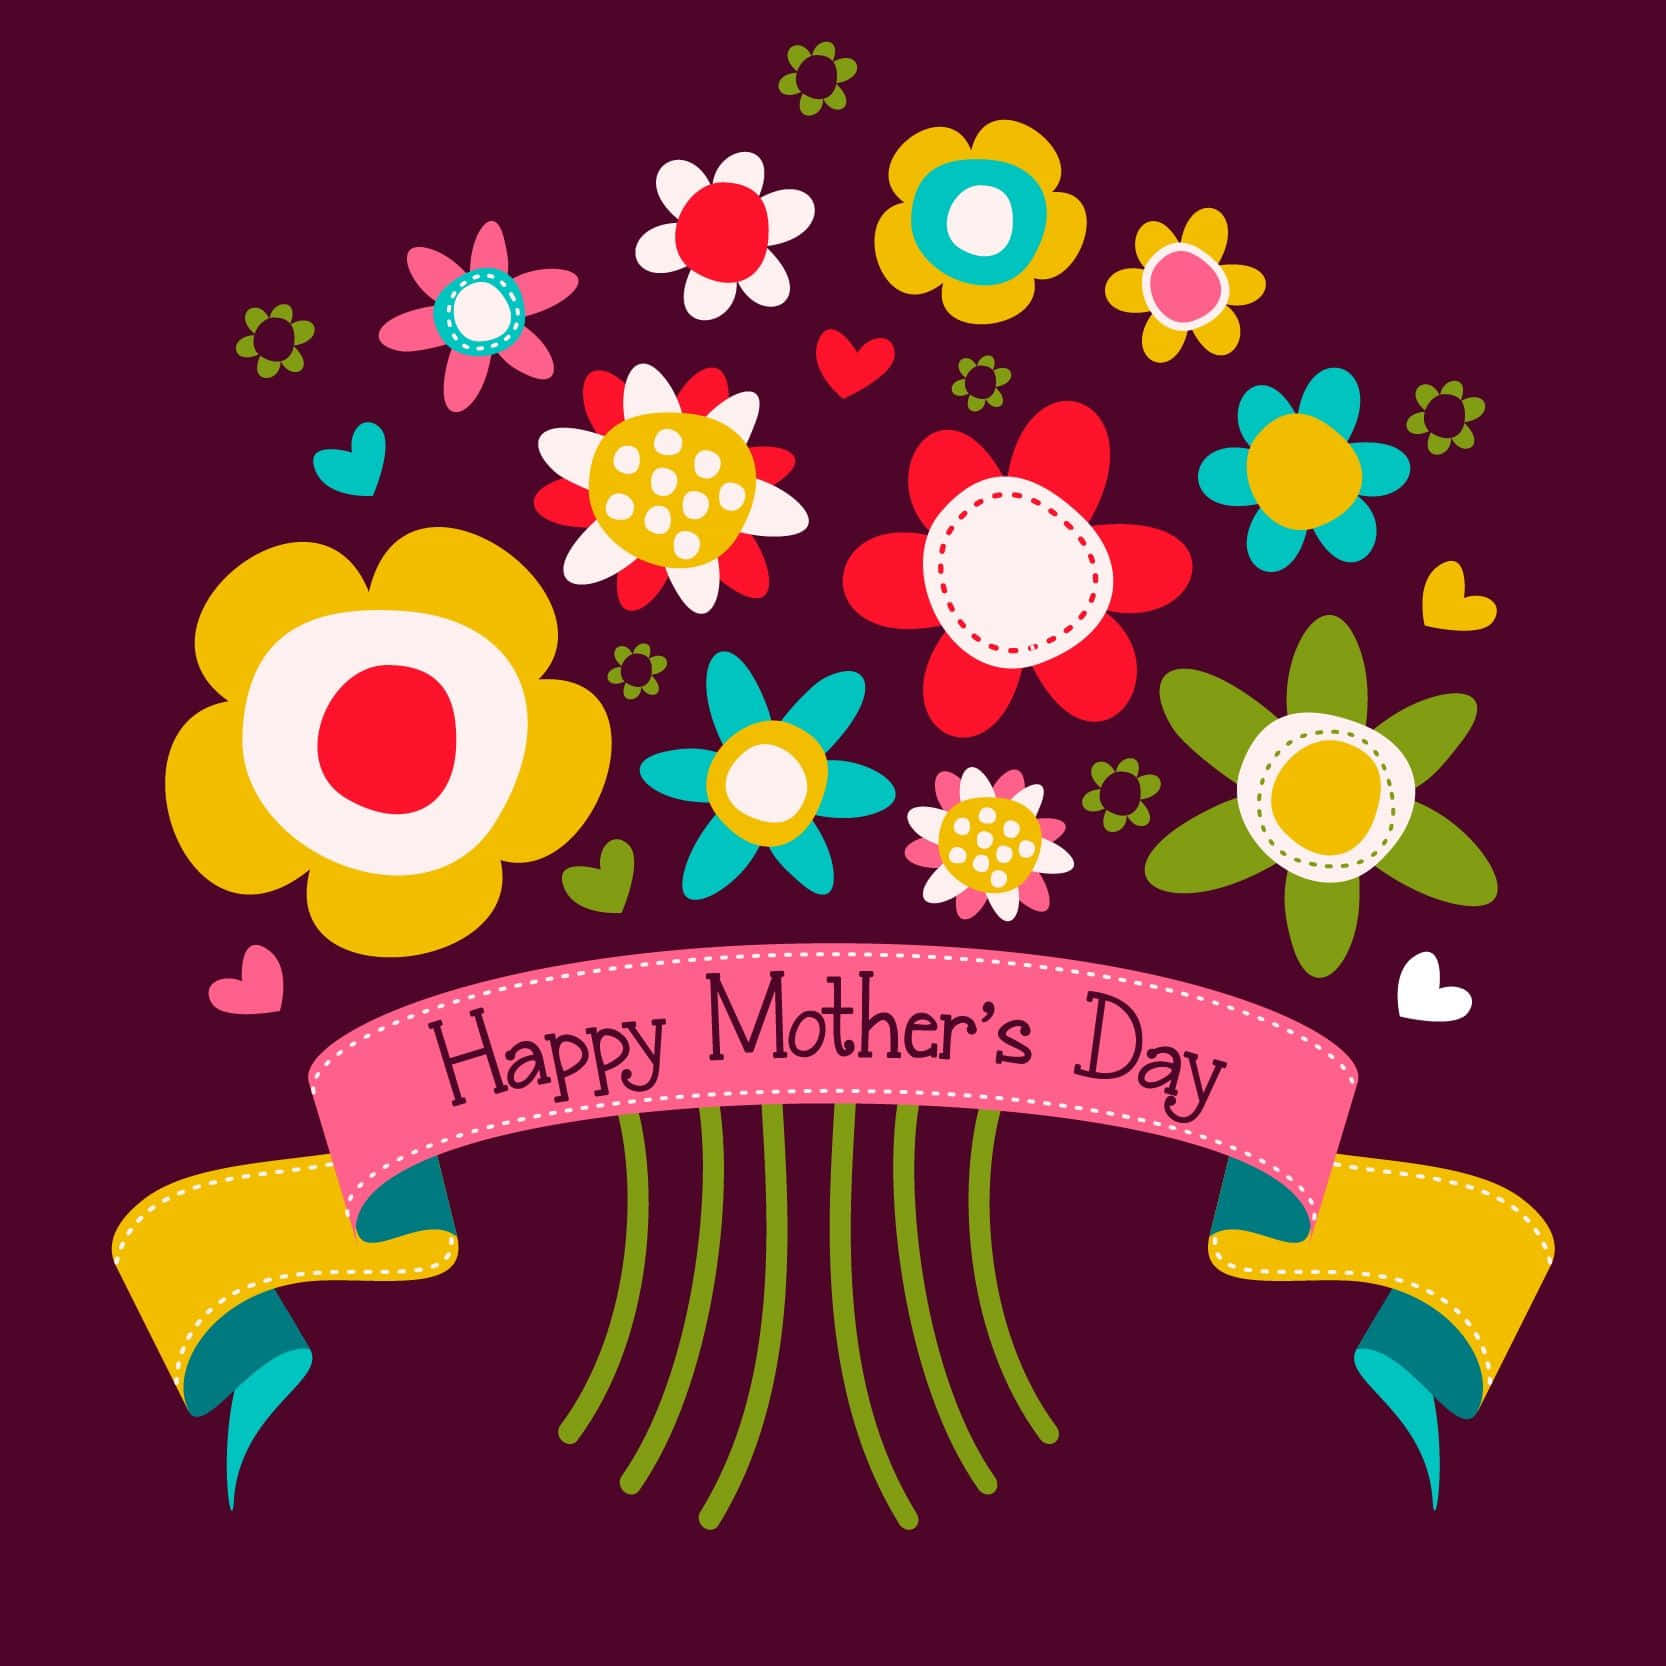 "Happy Mother's Day! Show your gratitude and love today."